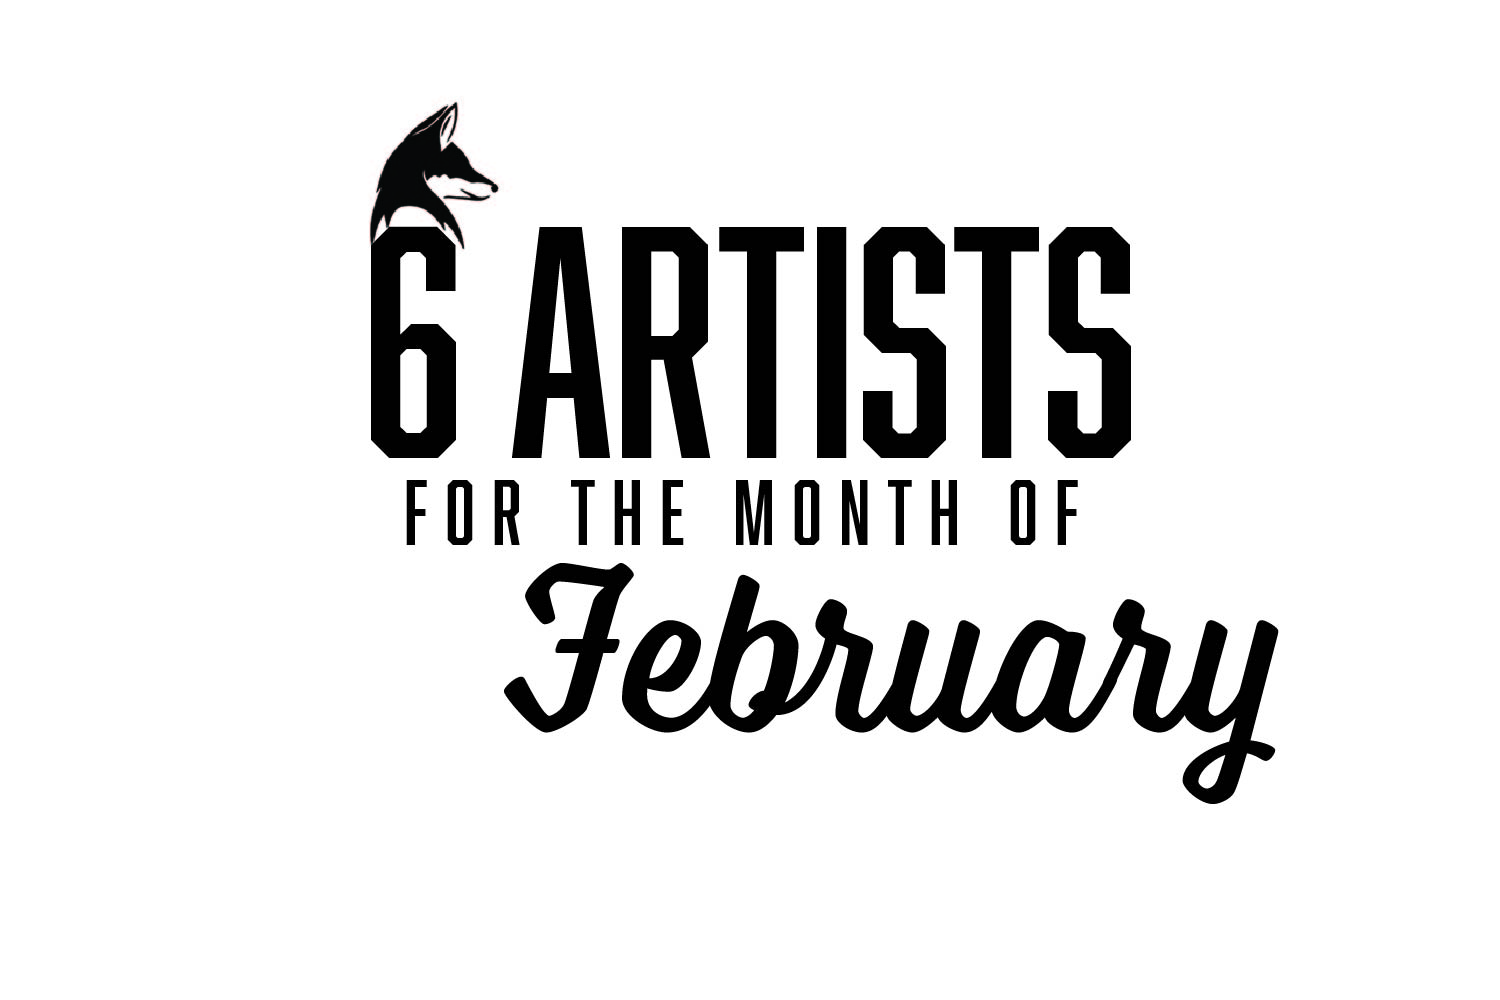 Six+Artists+You+Should+Be+Listening+To%3A+February+2021+EDITION